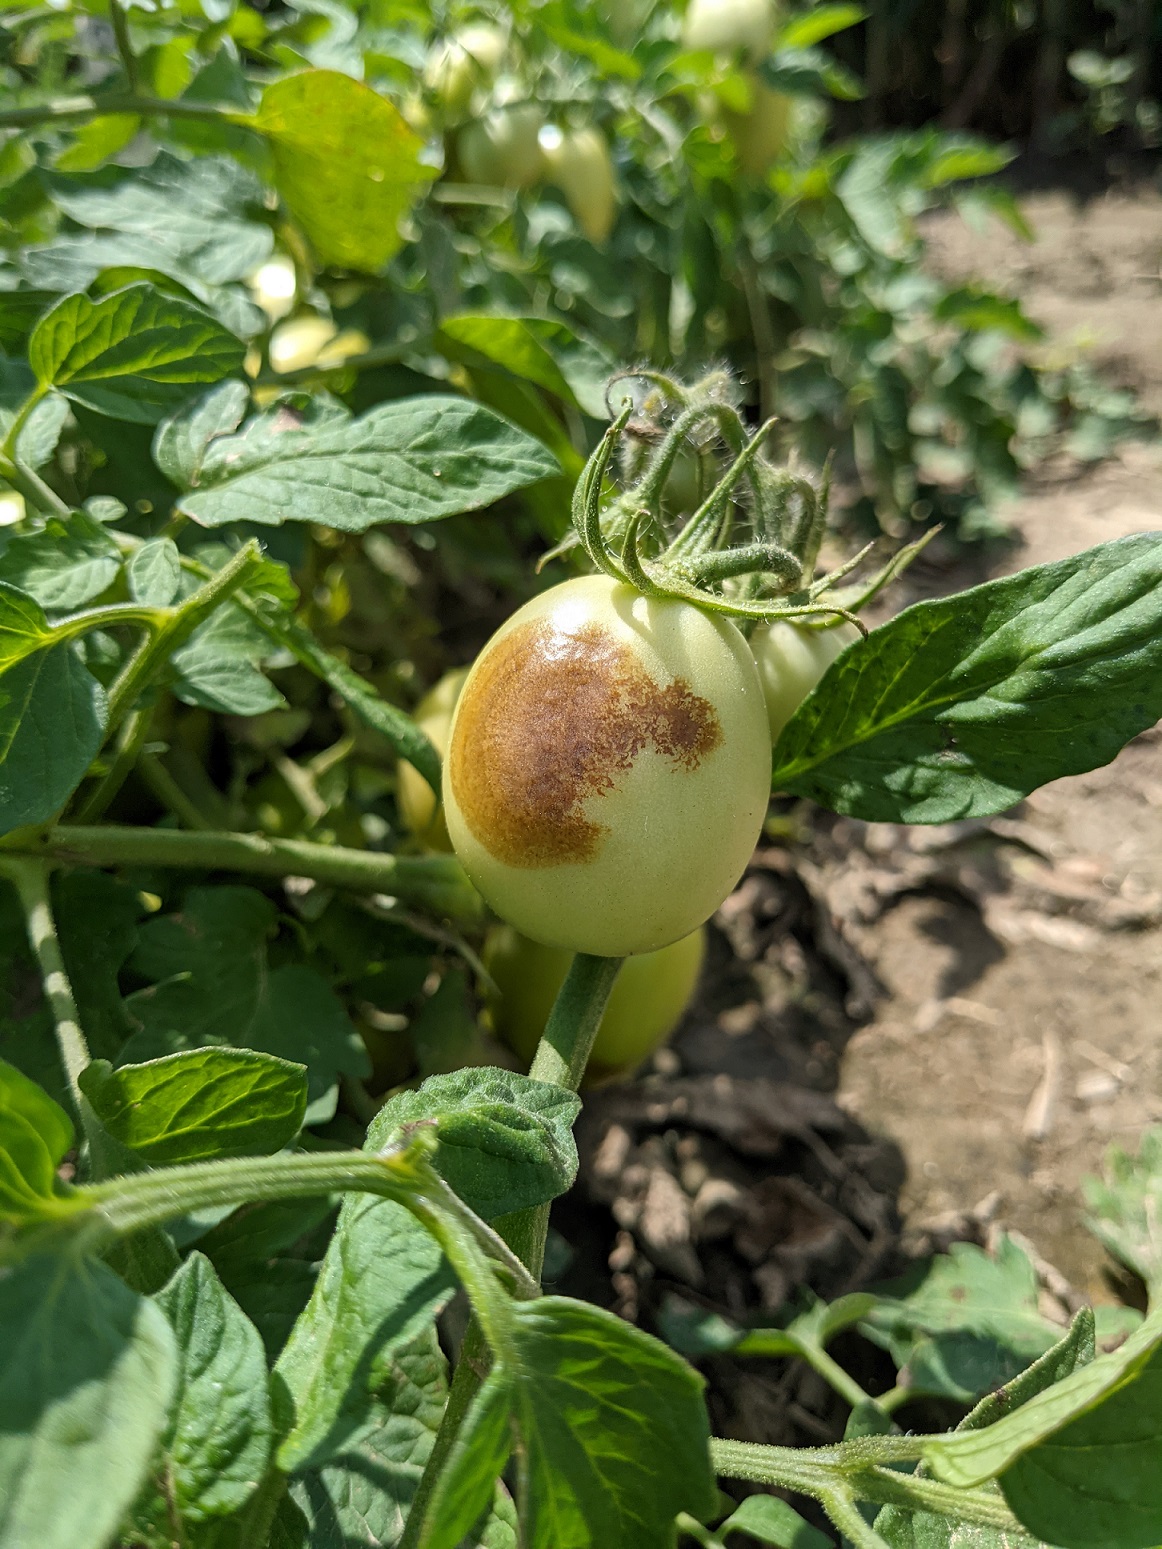 A processing tomato with Buckeye rot.